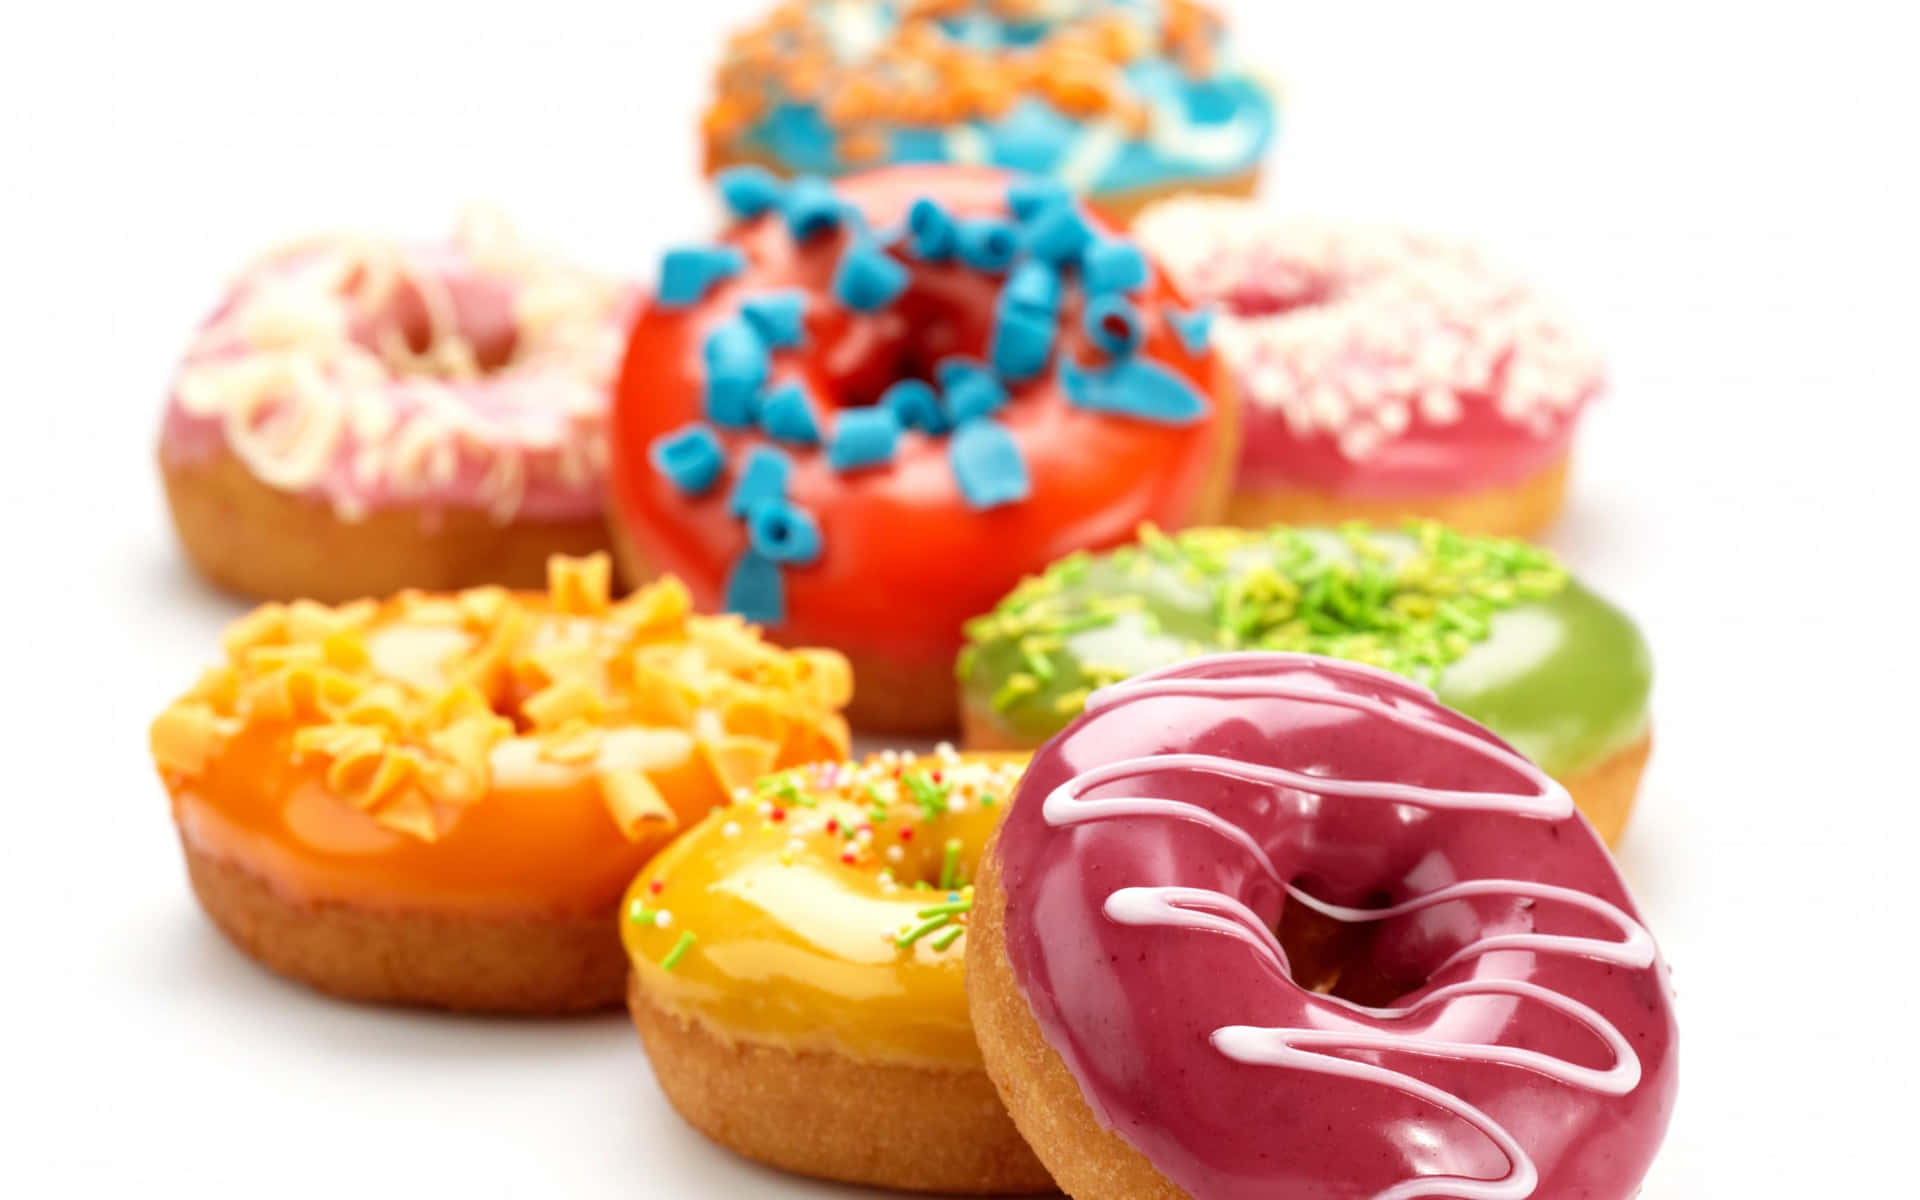 Colorful Donuts On A White Background